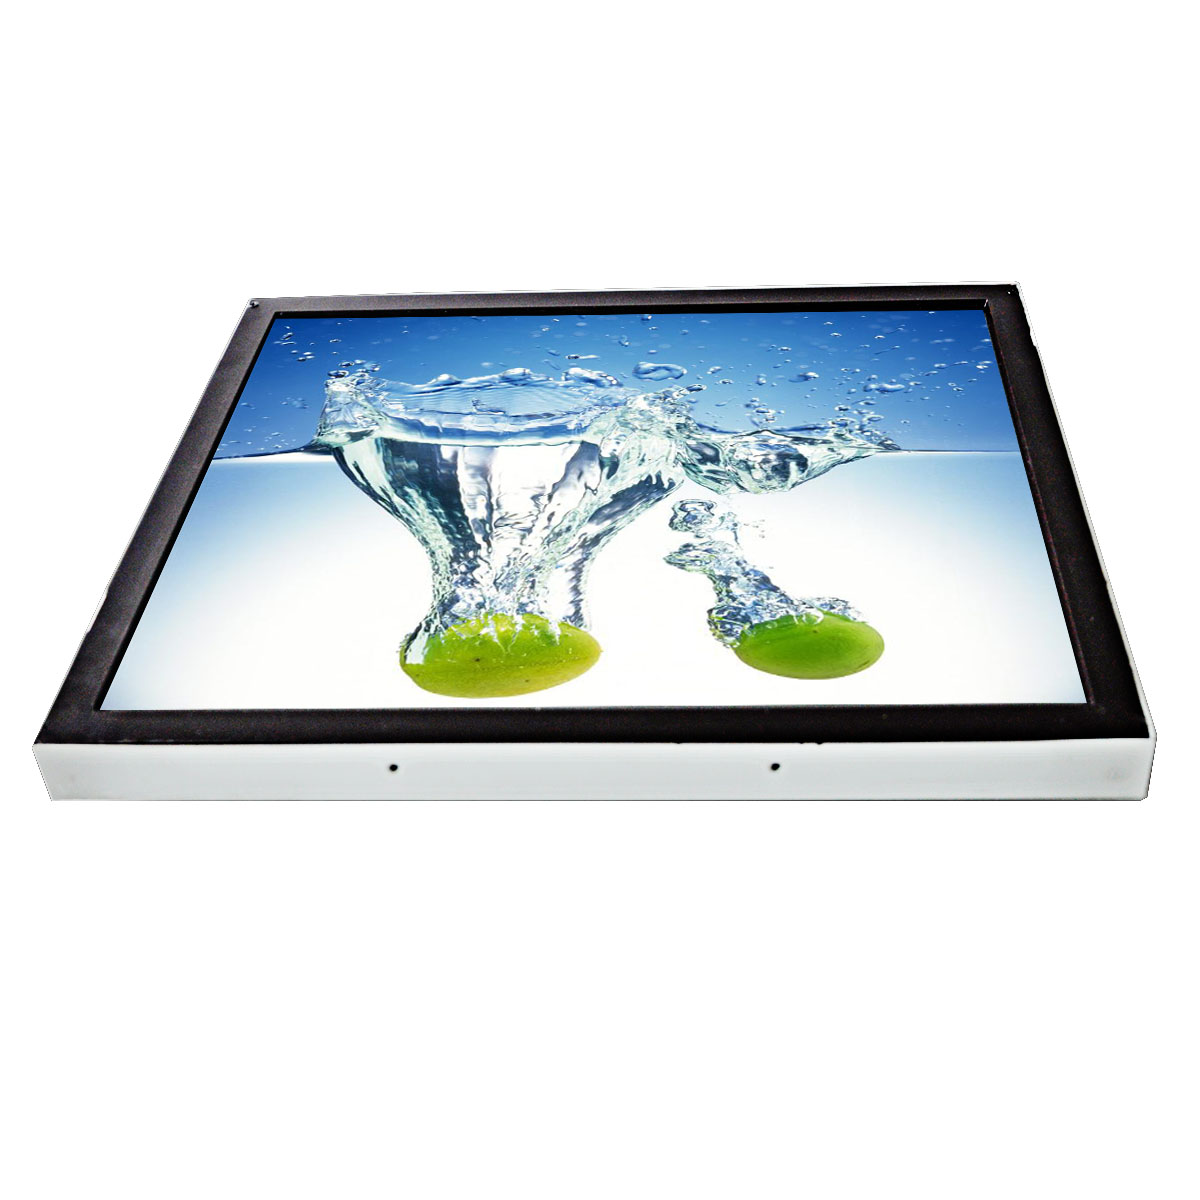 https://www.cjtouch.com/19-inch-ip65- waterproof-infrared-pc-monitor-touch-screen-product/